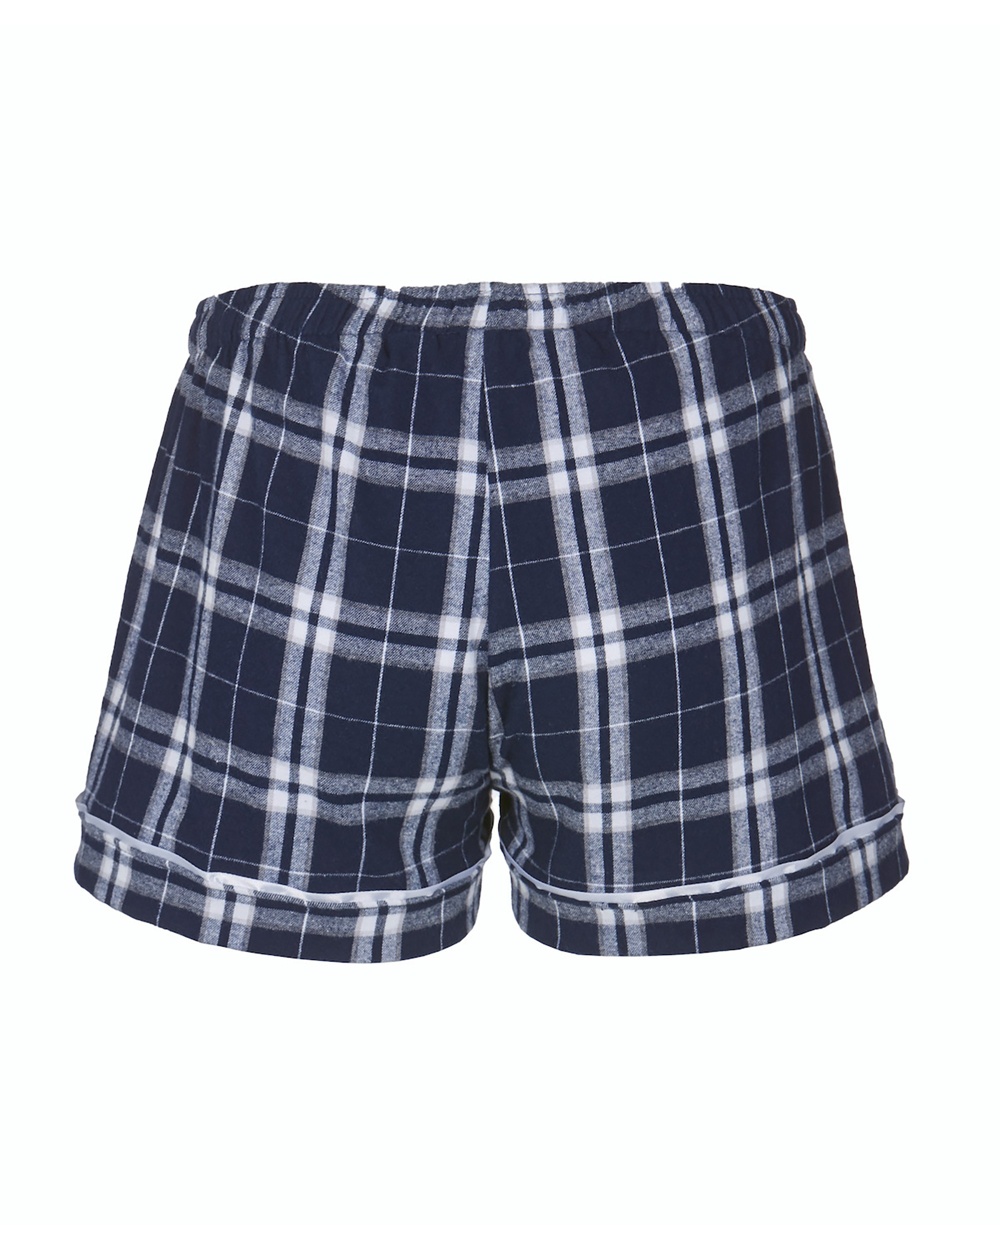 boxercraft Essential Cotton Flannel Boxer Shorts, with Fly Front